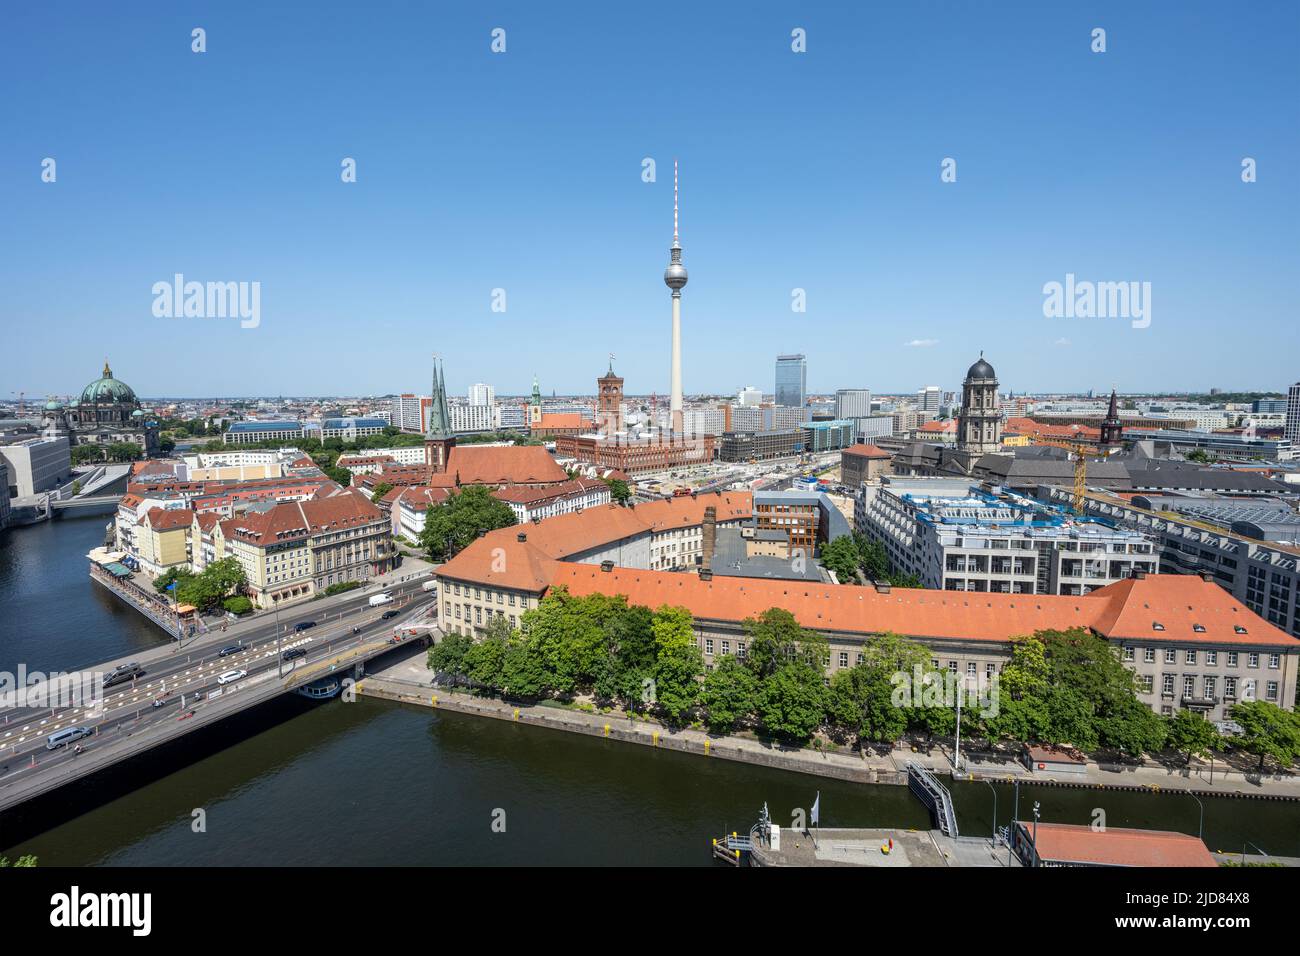 The center of Berlin with the famous TV Tower on a sunny day Stock Photo